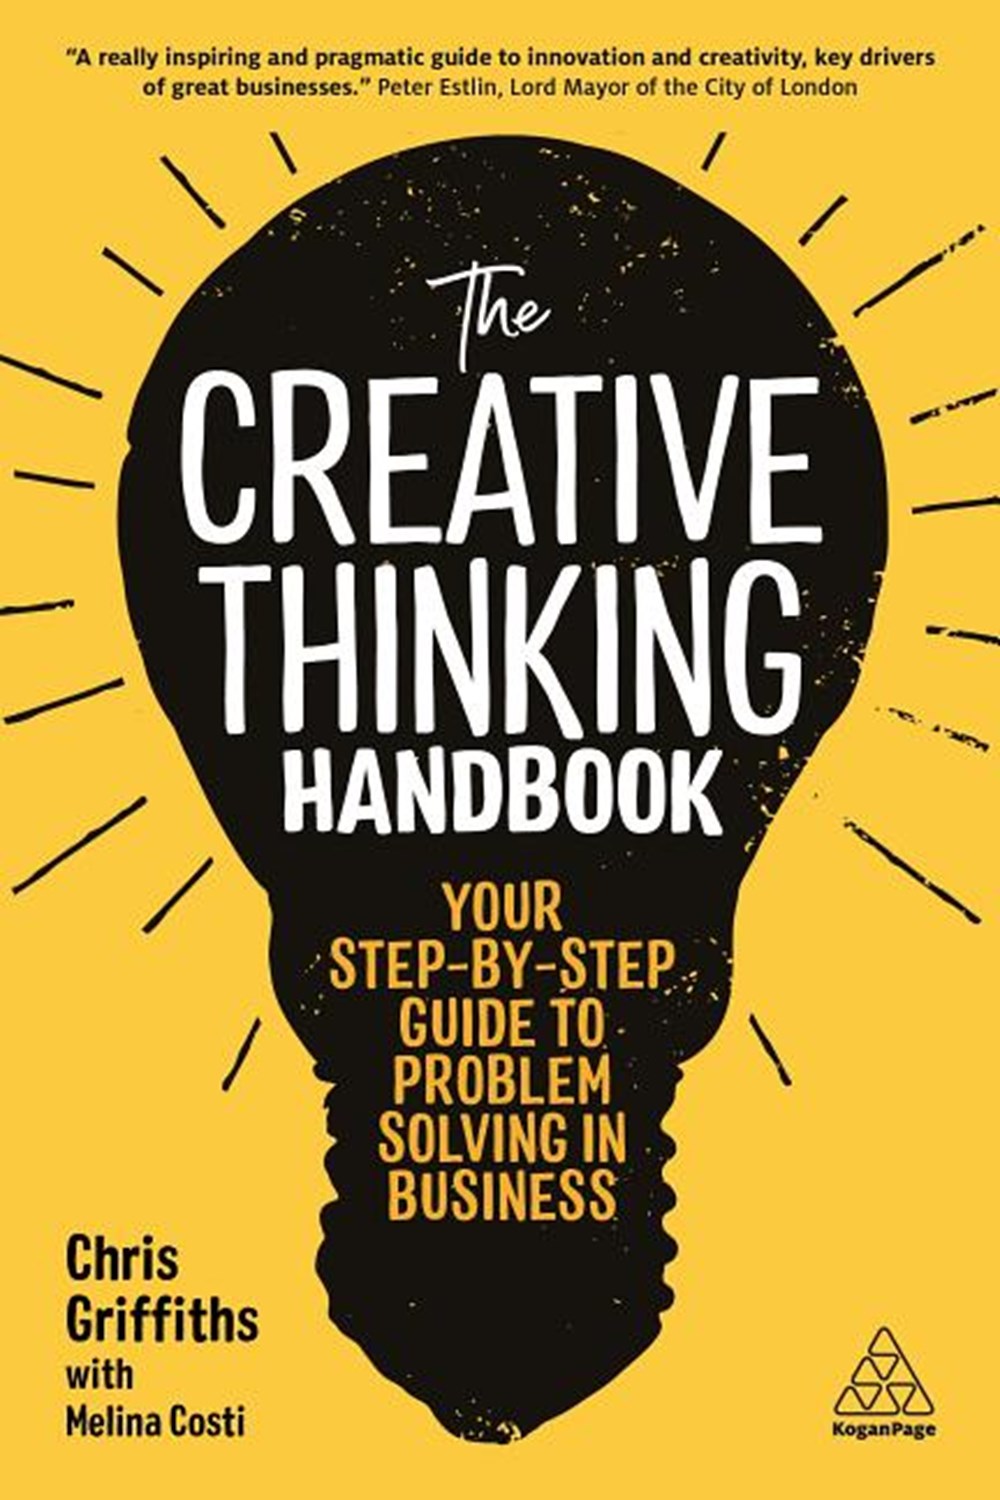 how does creative thinking relate to problem solving